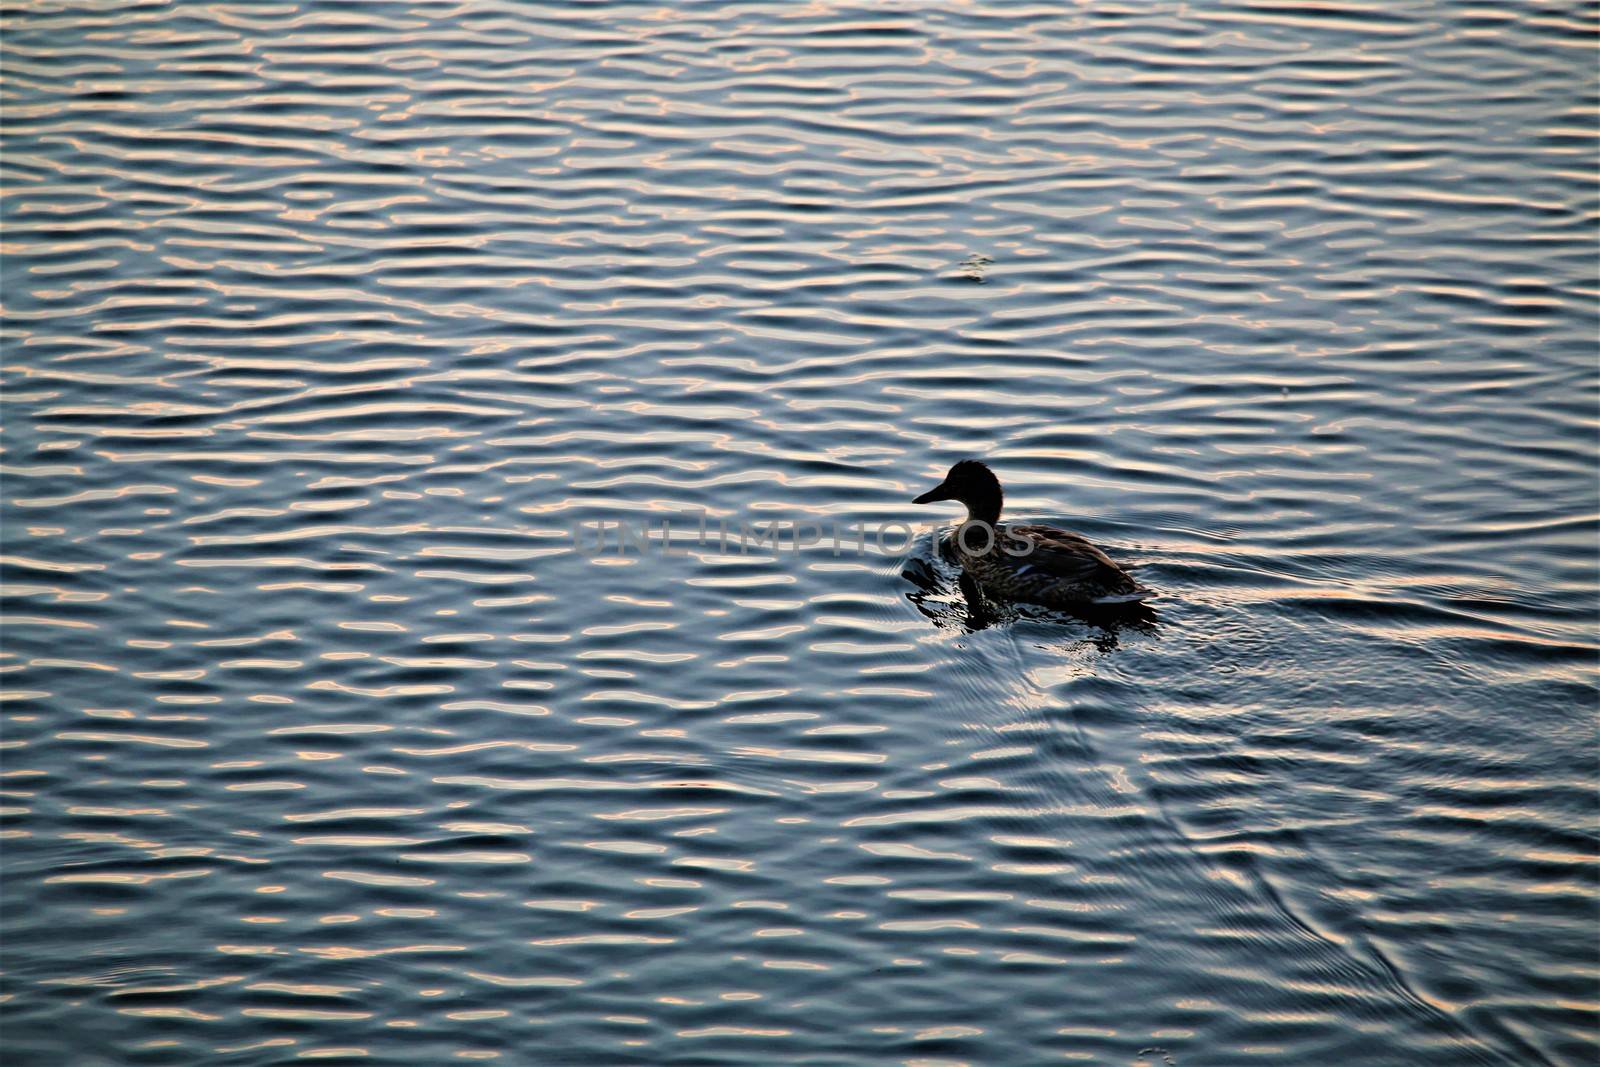 A duck during a great sunset swimming on a lake